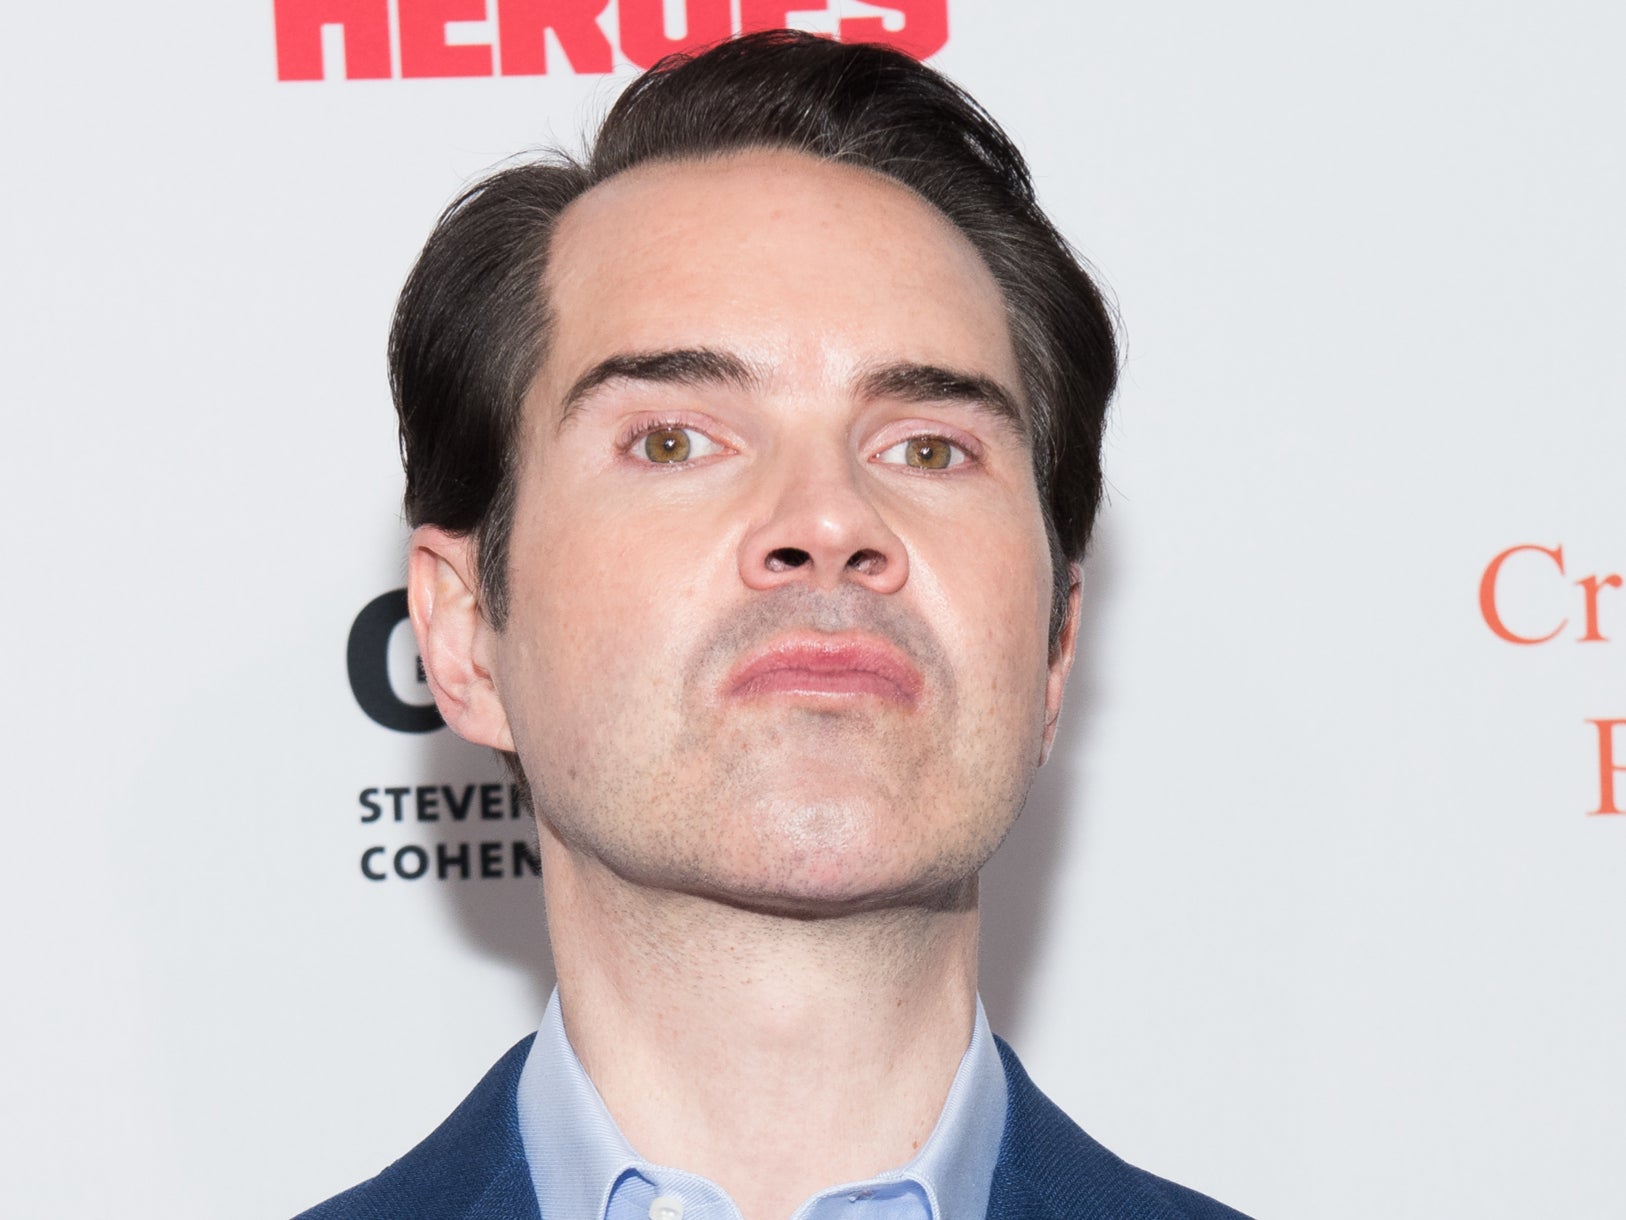 Jimmy Carr has faced a torrent of criticism following his Netflix show